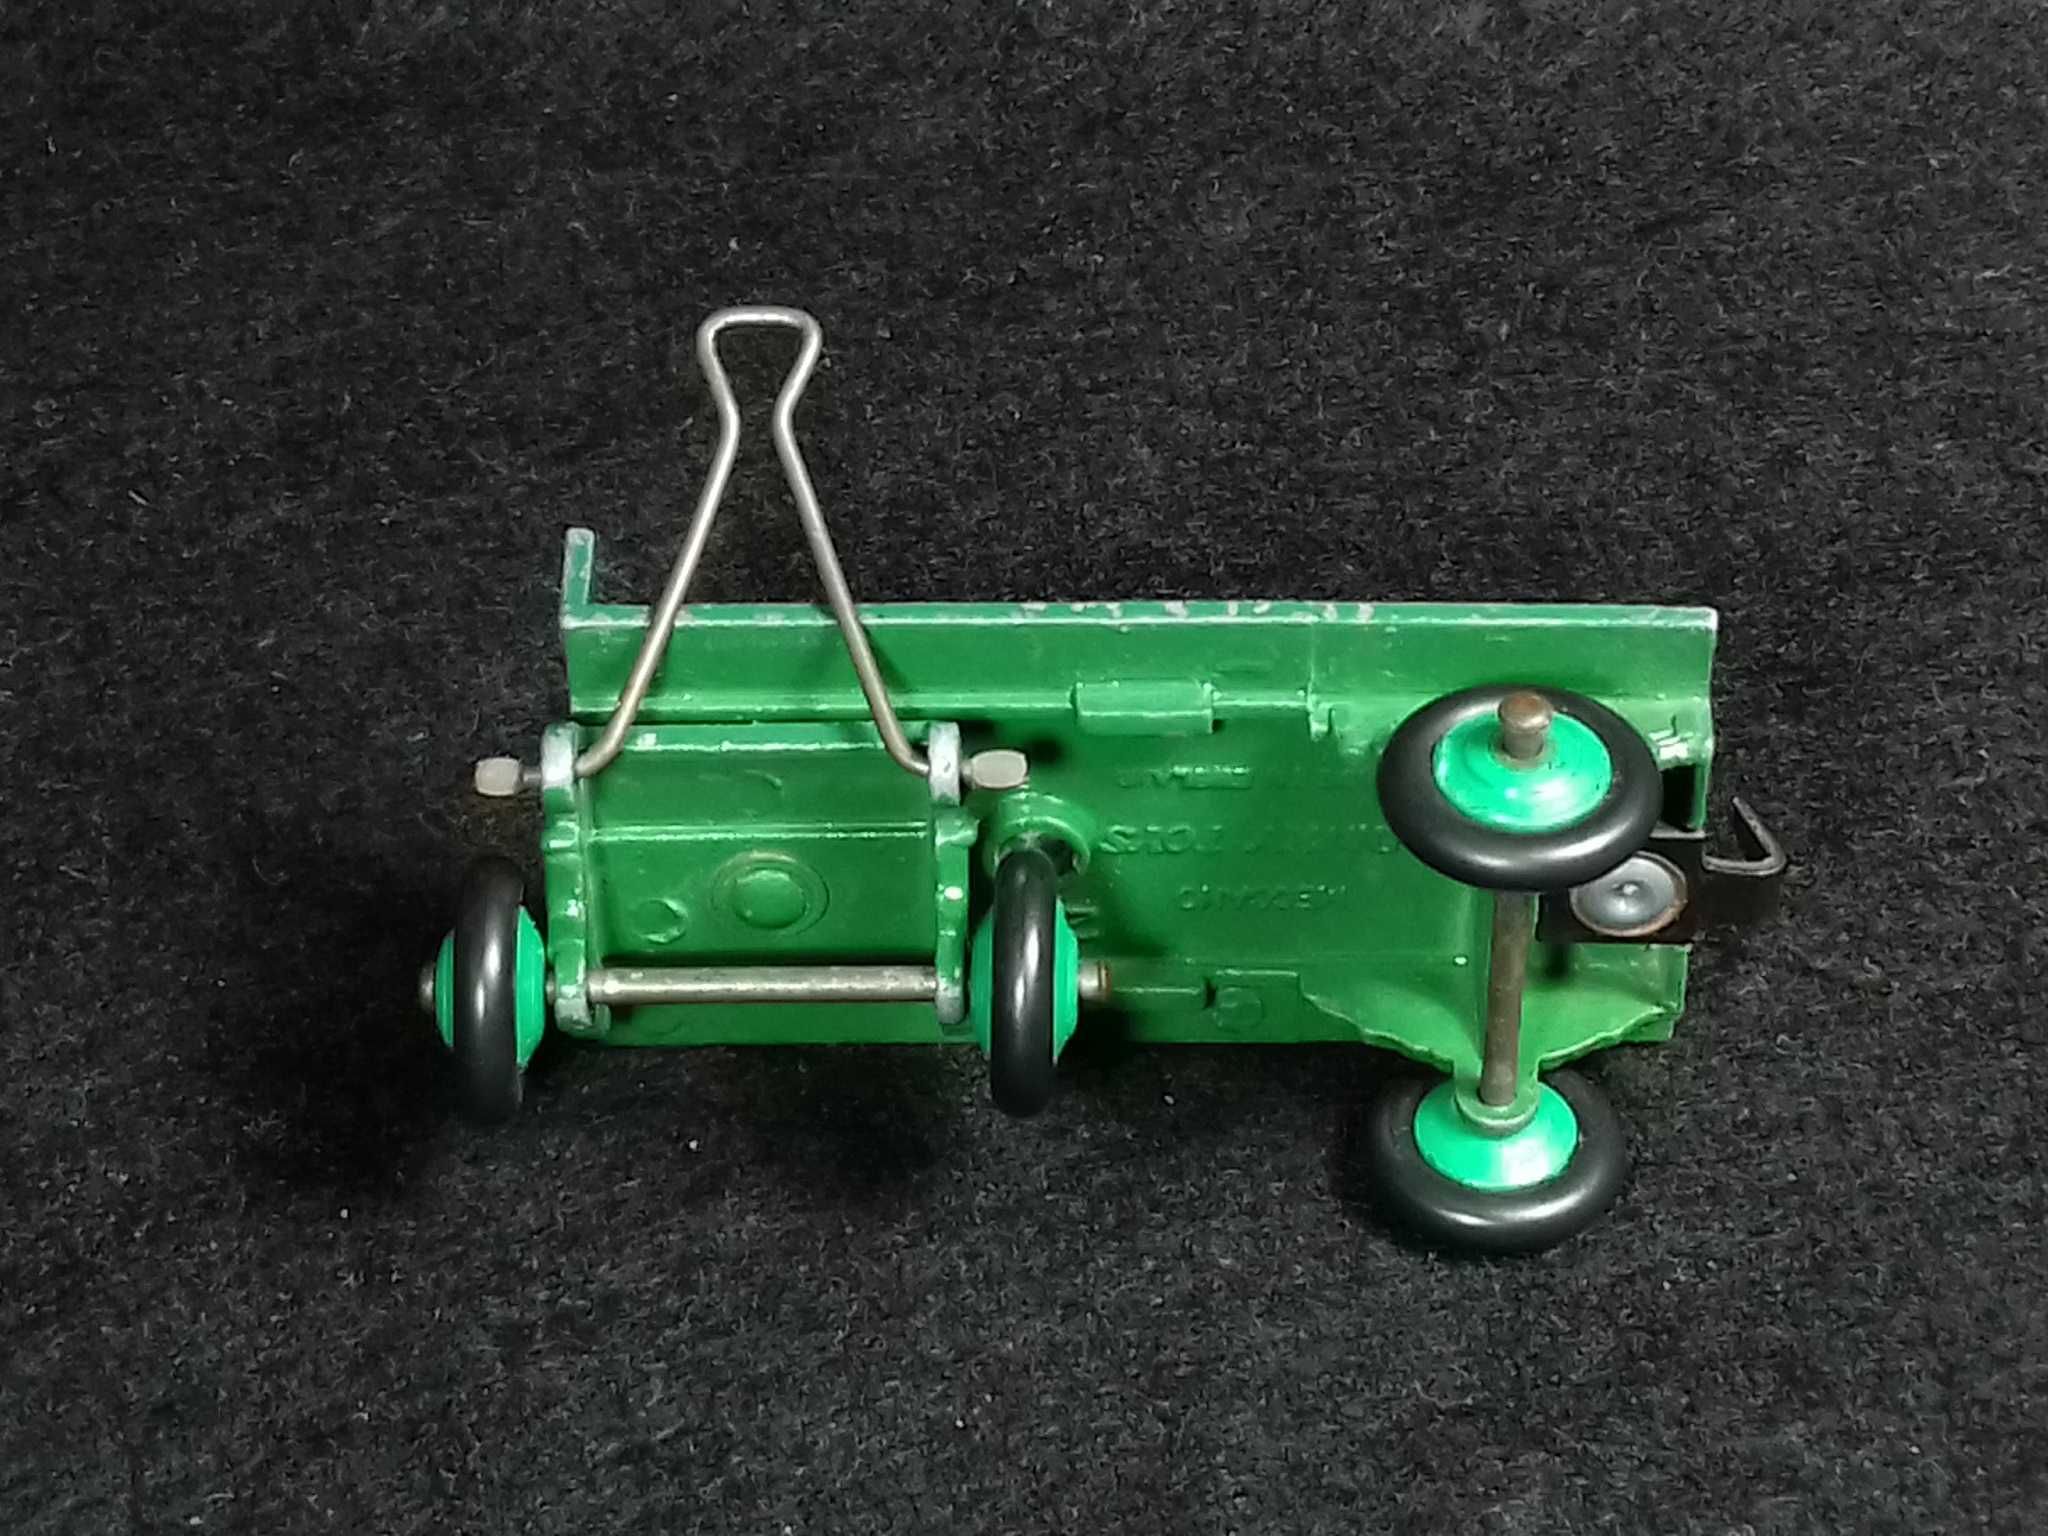 Dinky Toys #25G - Trailer - 1940/50s by Meccano Ltd